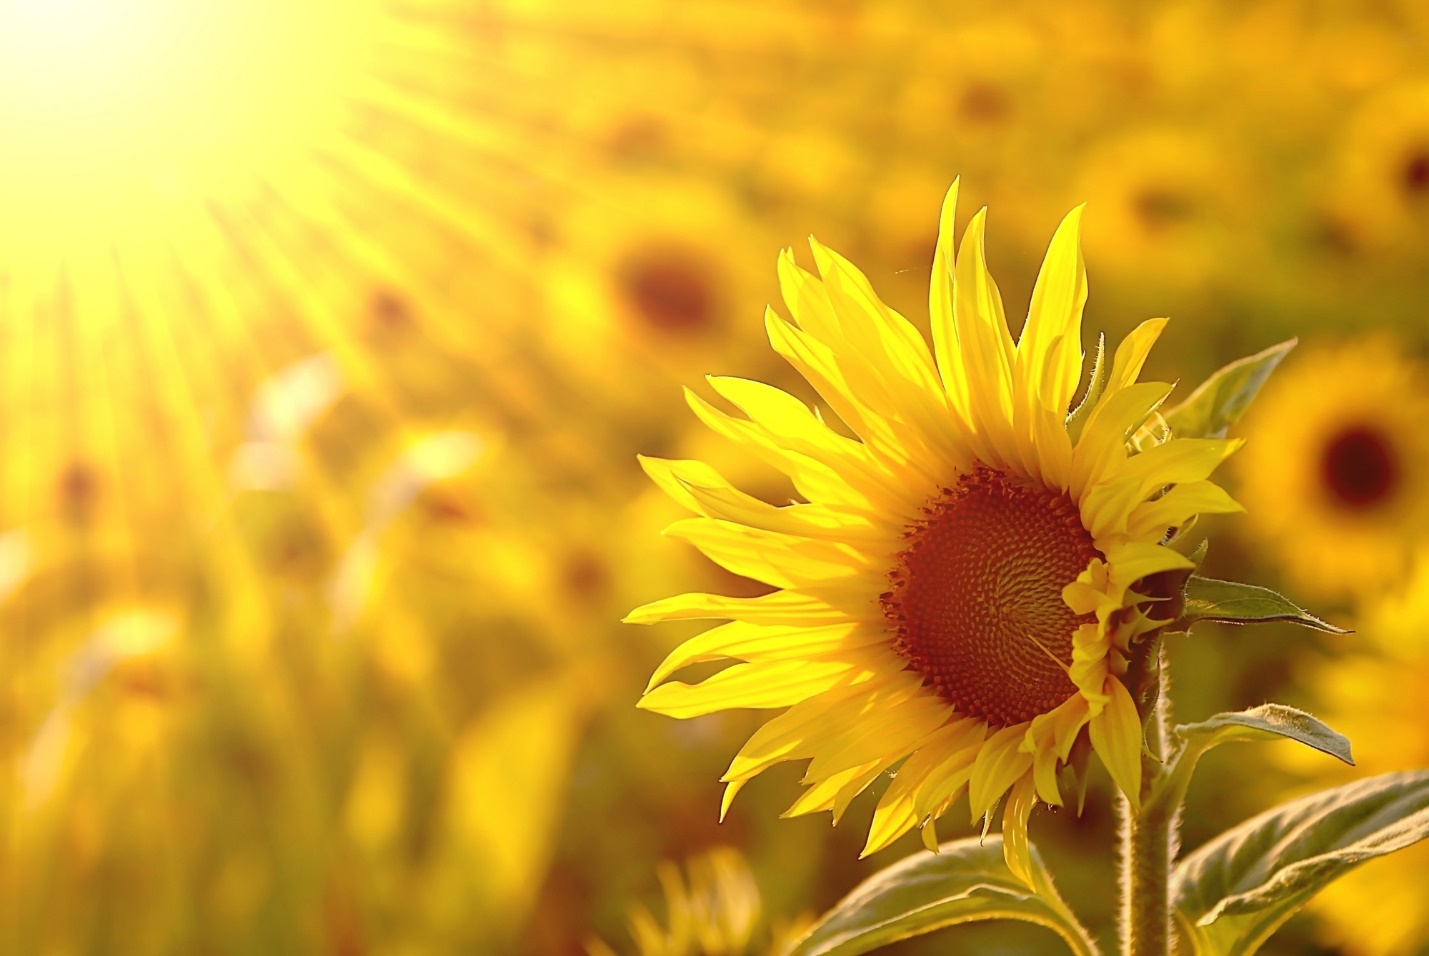 A close up of a sunflower

Description automatically generated